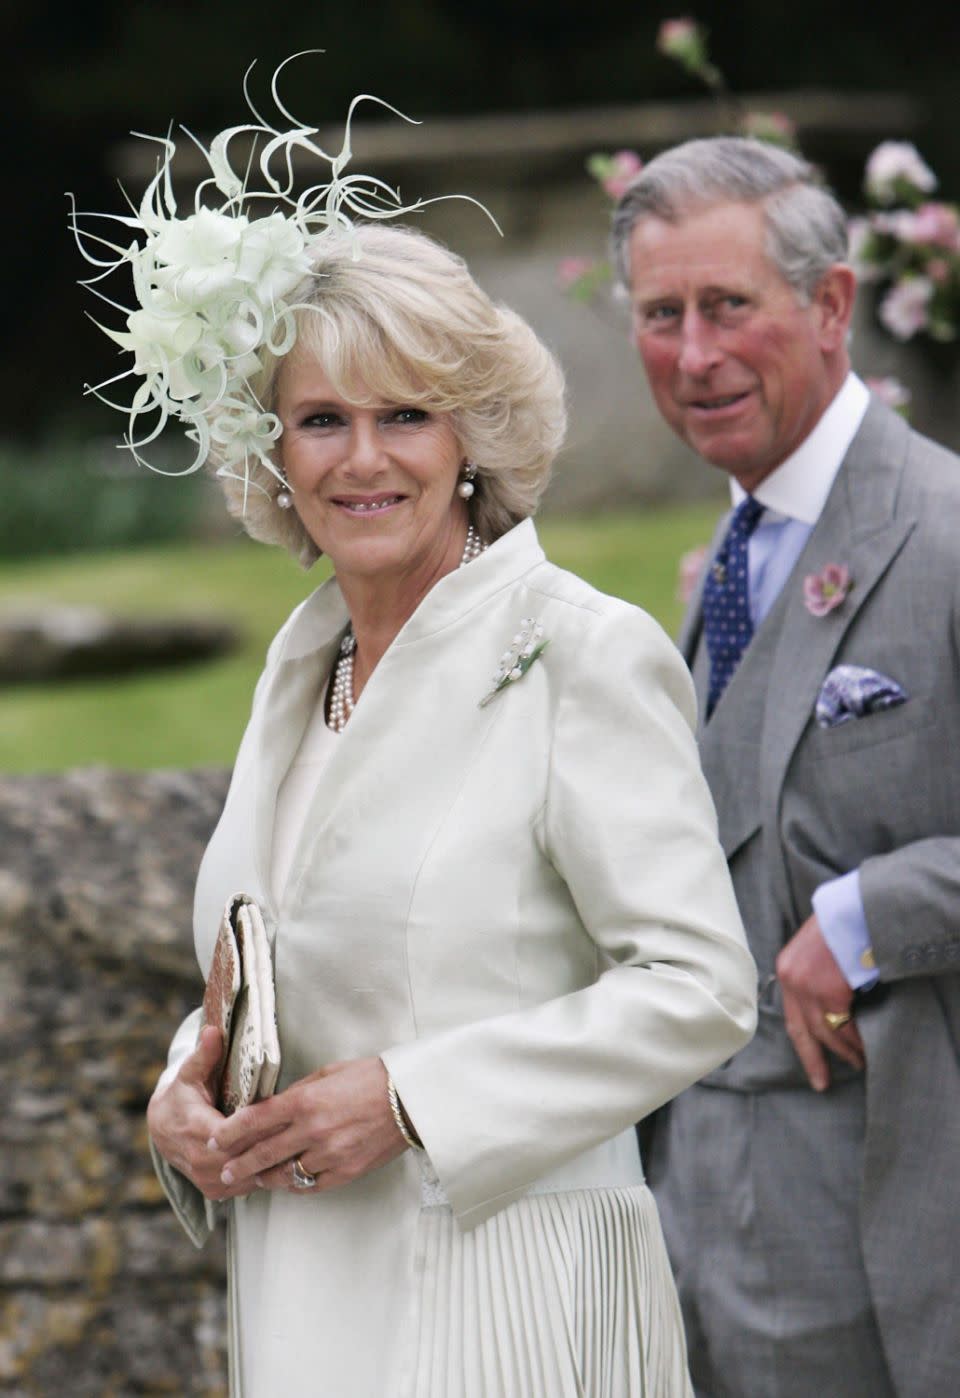 Camilla's surgery reportedly happened right before her wedding to Prince Charles in 2005. Photo: Getty Images